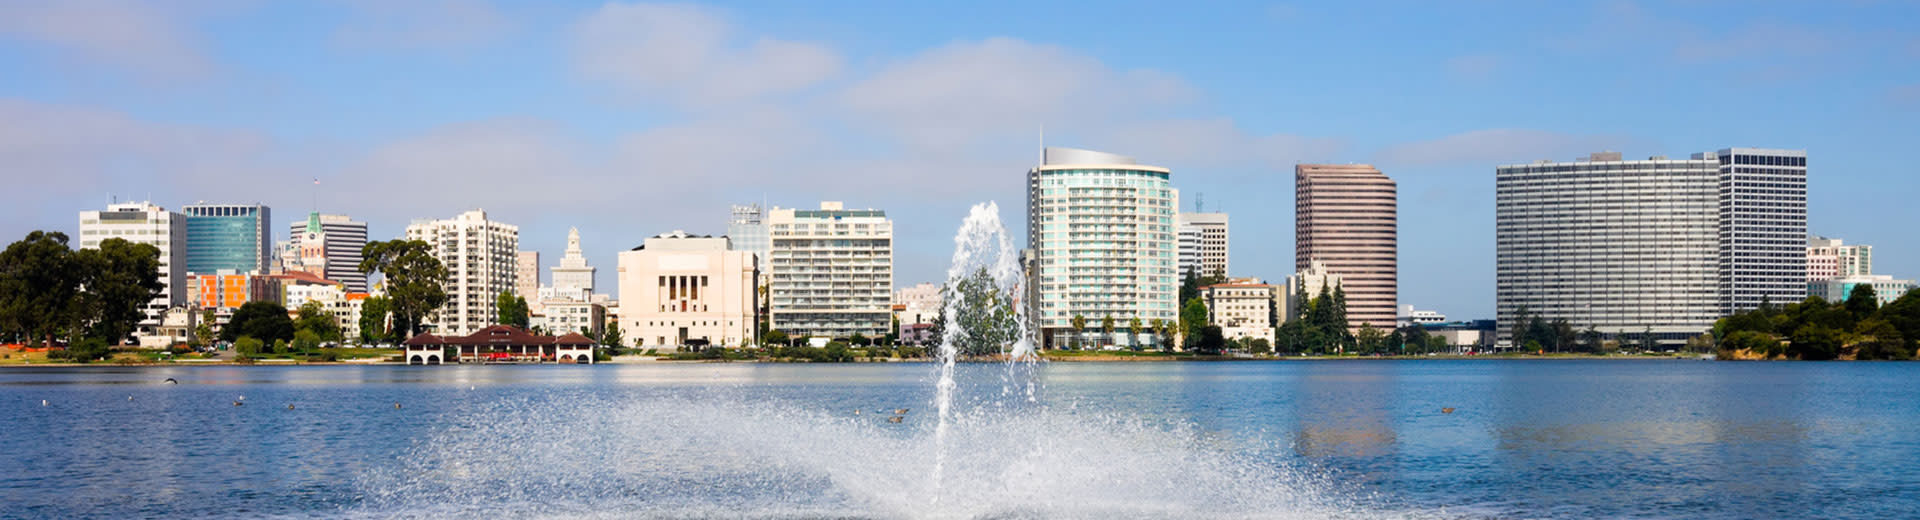 The skyscrapers of Oakland sit behind a body of water, with a fountain in the forgeround.